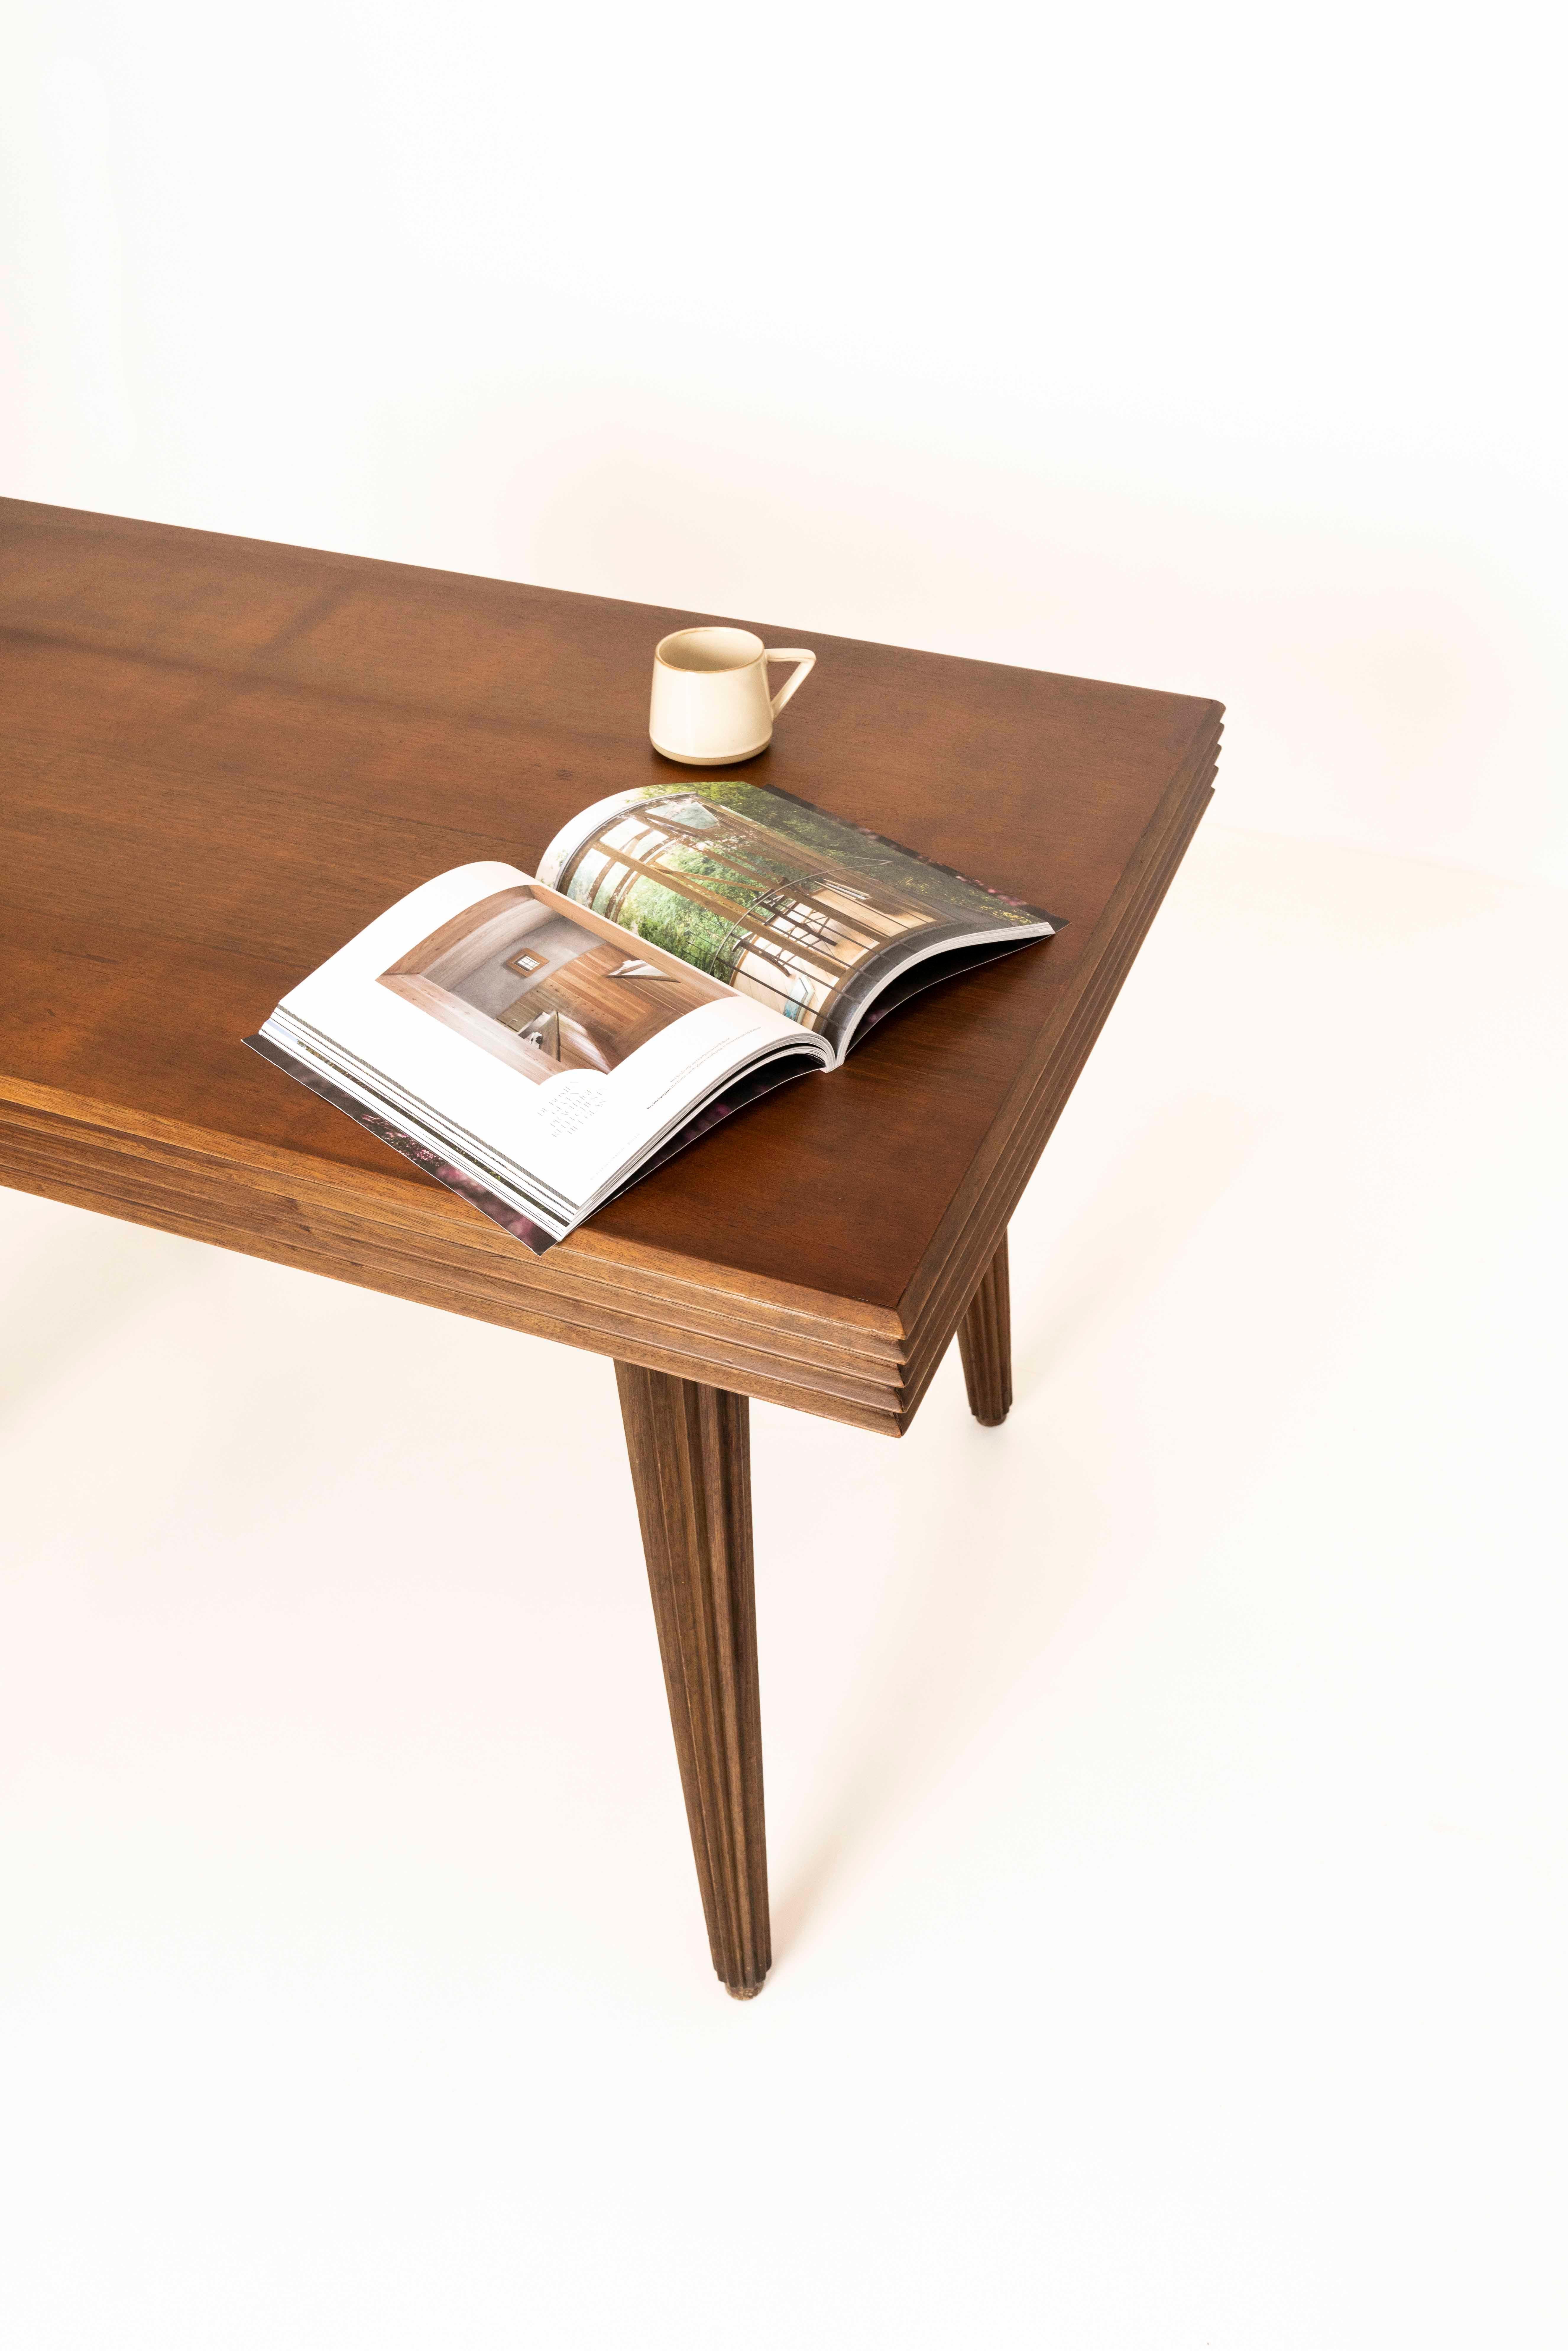 Gio Ponti Dining Table in Veneered Walnut, Italy 1940s For Sale 4